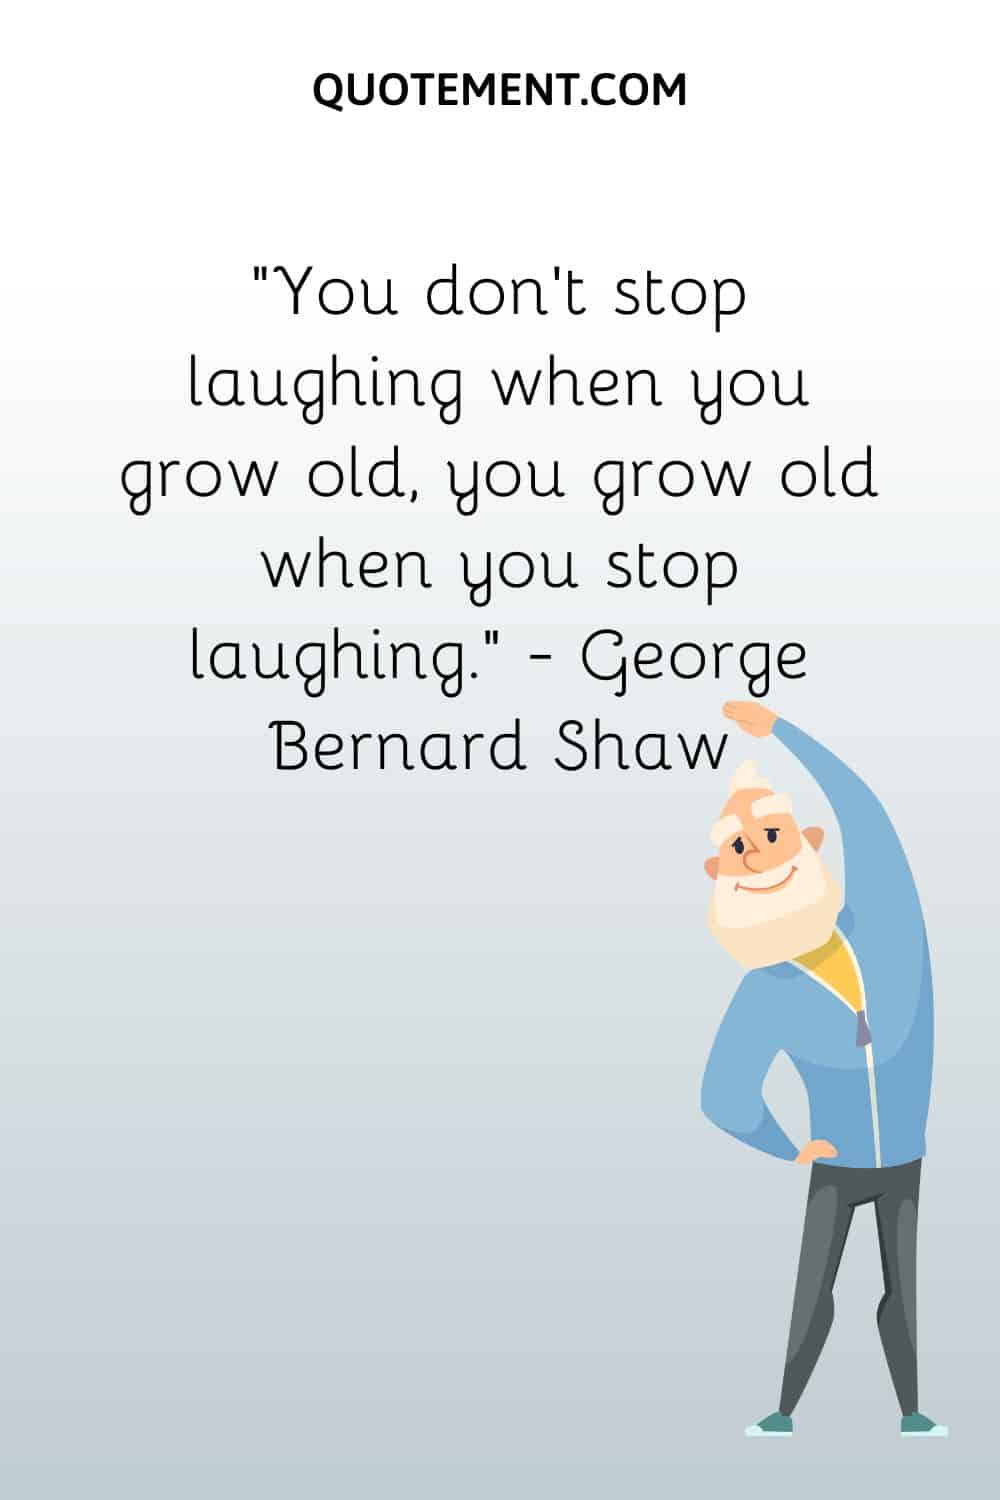 You don’t stop laughing when you grow old, you grow old when you stop laughing